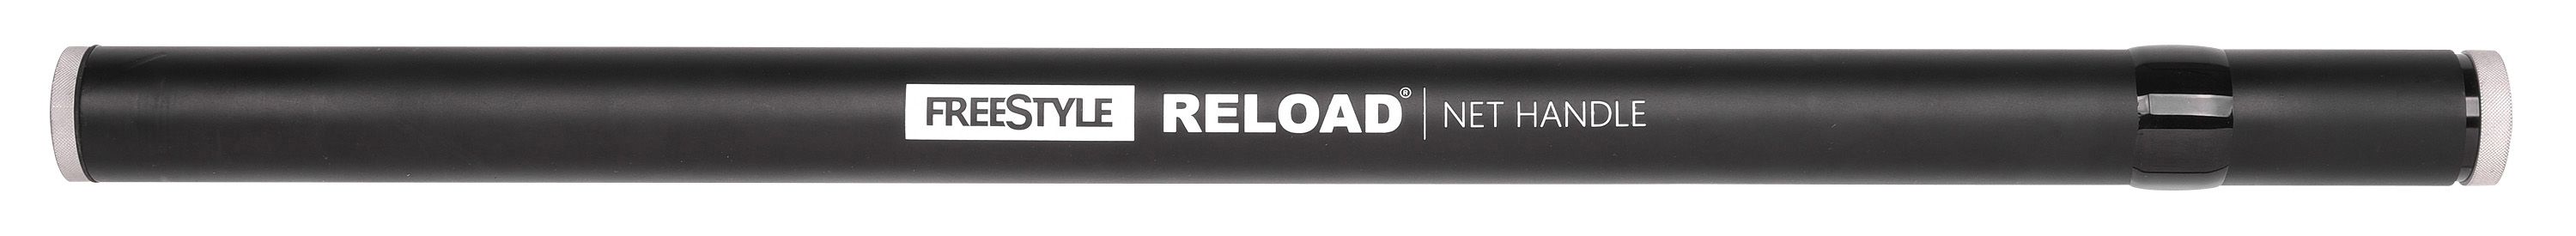 Spro Freestyle Reload Net Handle - 4,00m